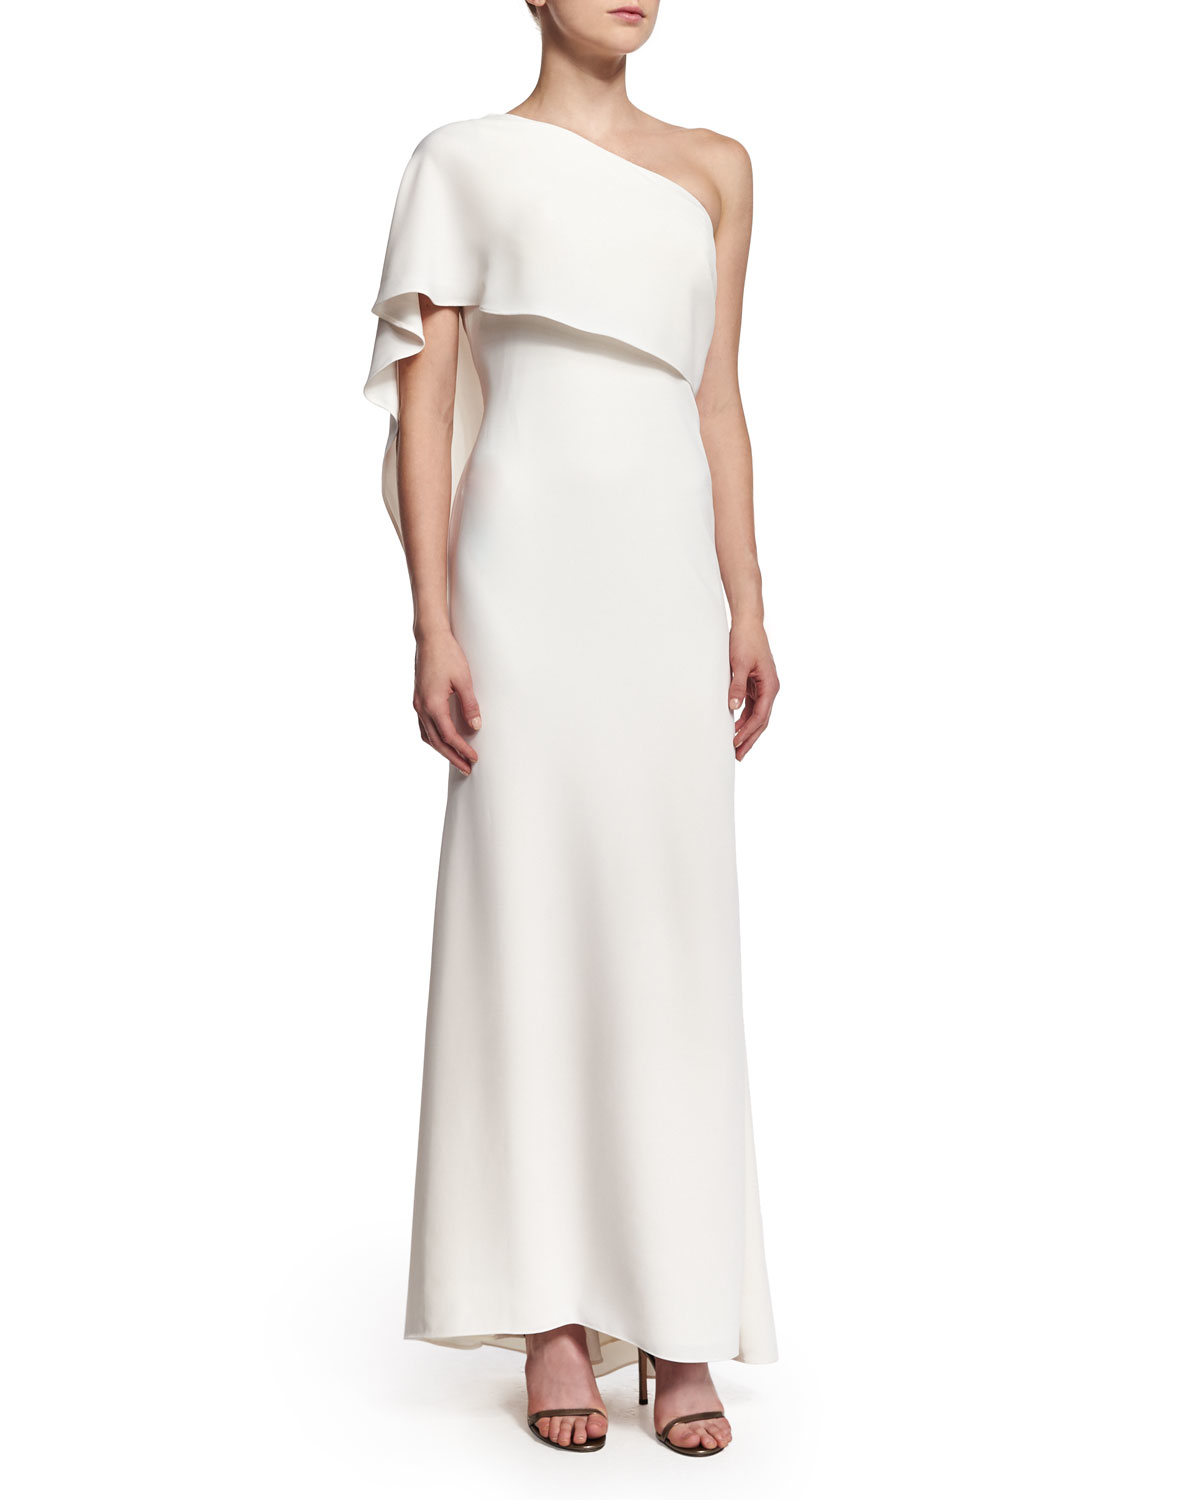 Lyst - Carmen Marc Valvo One-shoulder Capelet Gown in White